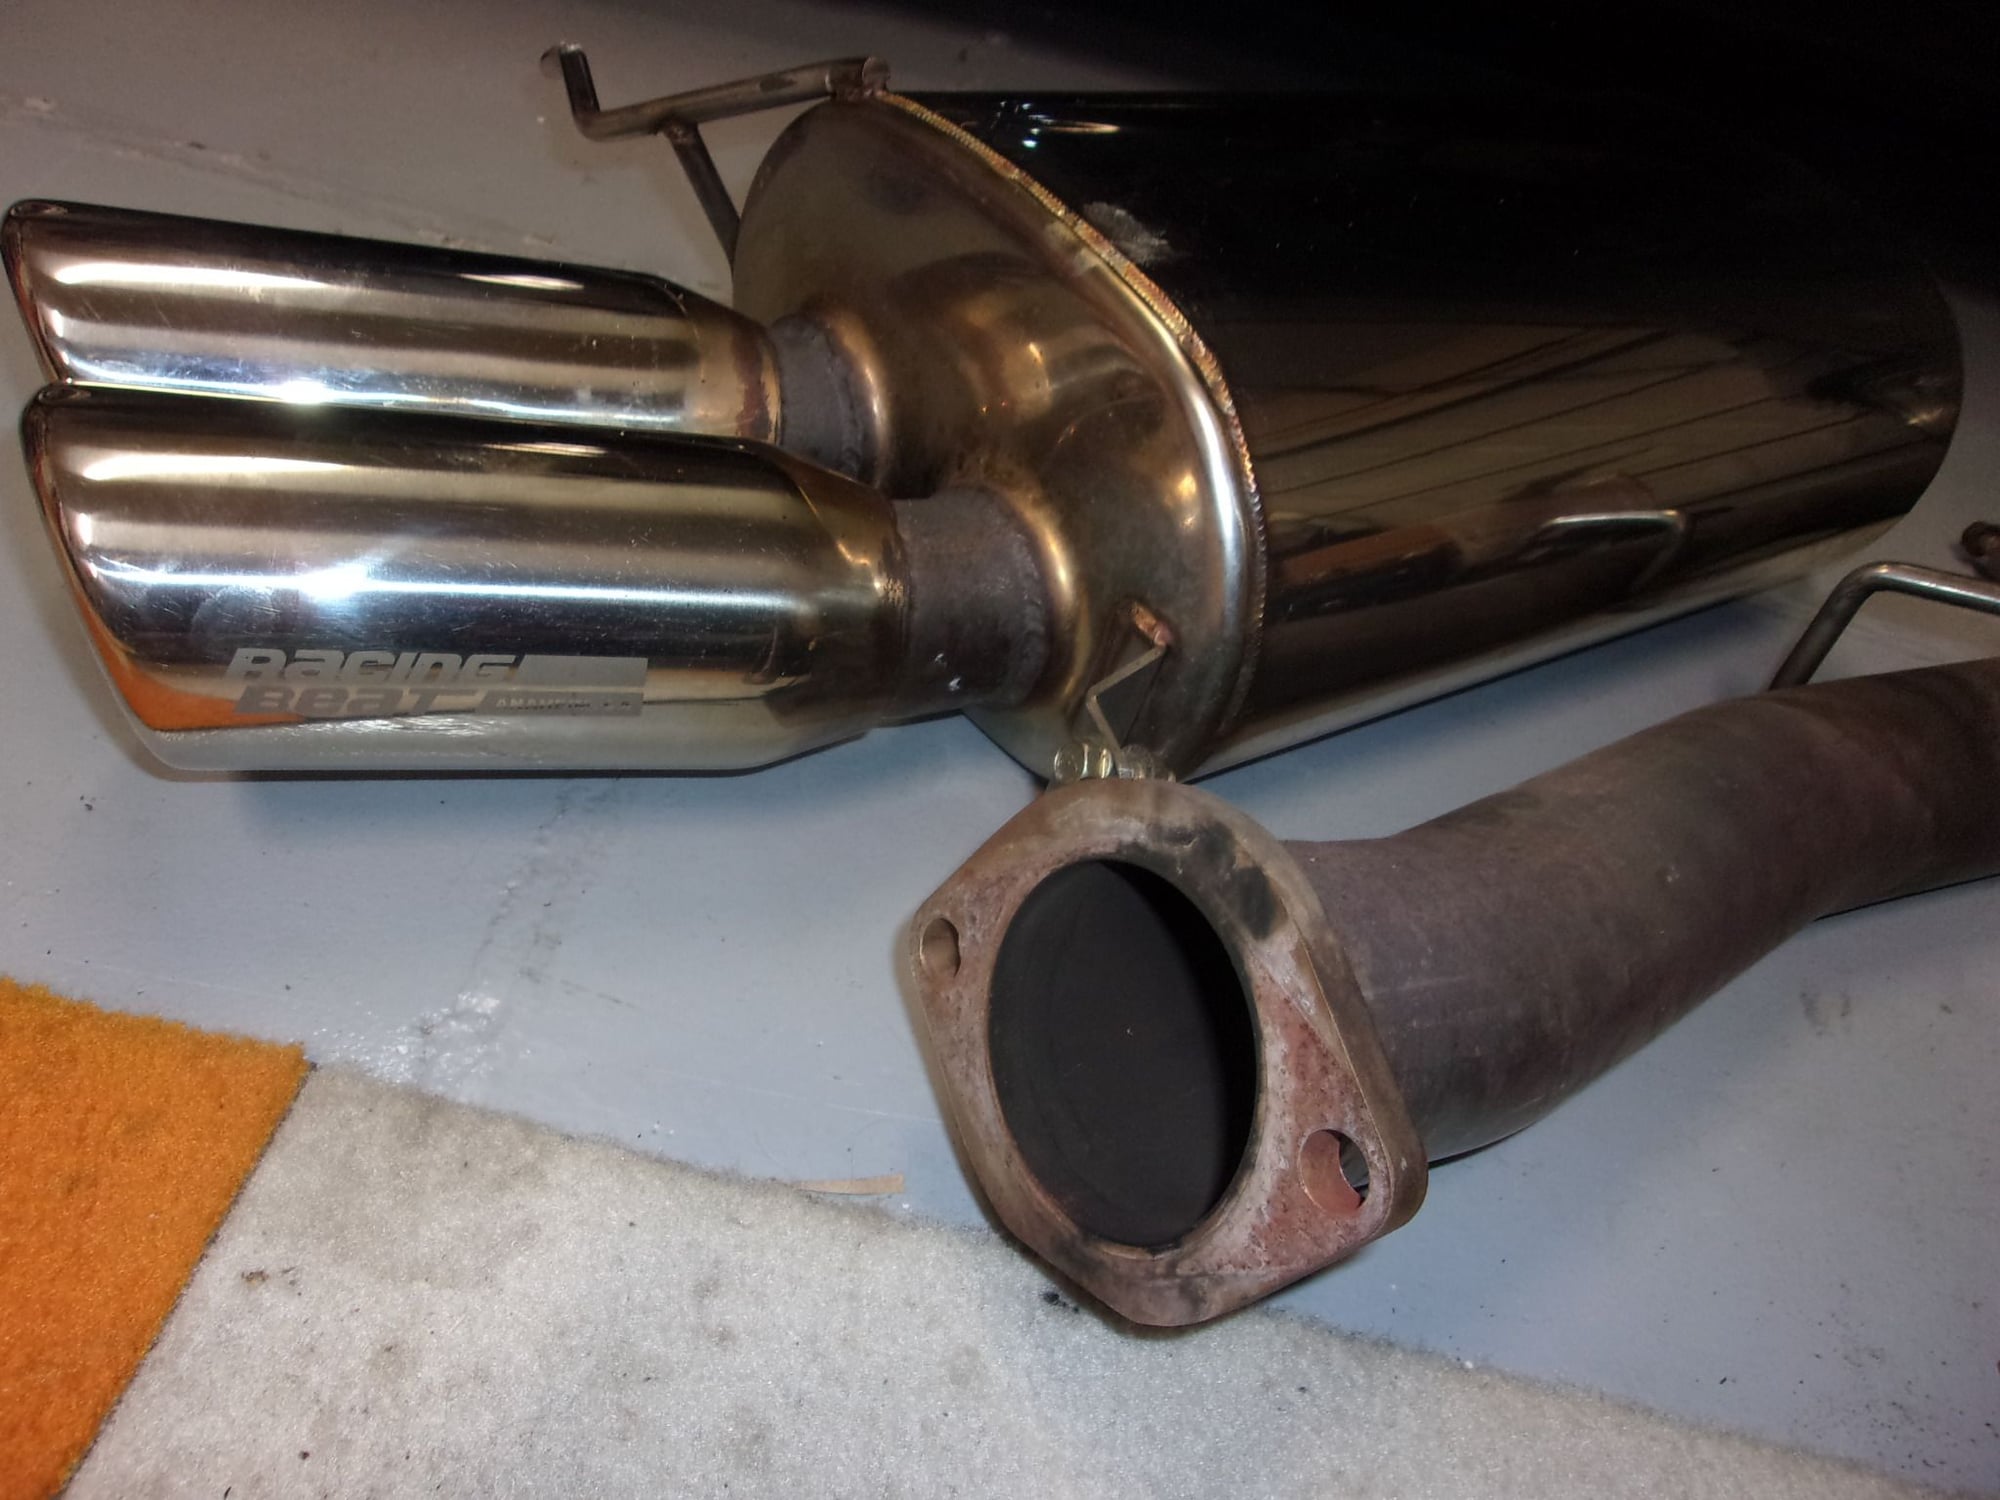 Engine - Exhaust - Hard-To-Find Parts #10 - Used - 1993 to 1995 Mazda RX-7 - Murfreesboro, TN 37130, United States